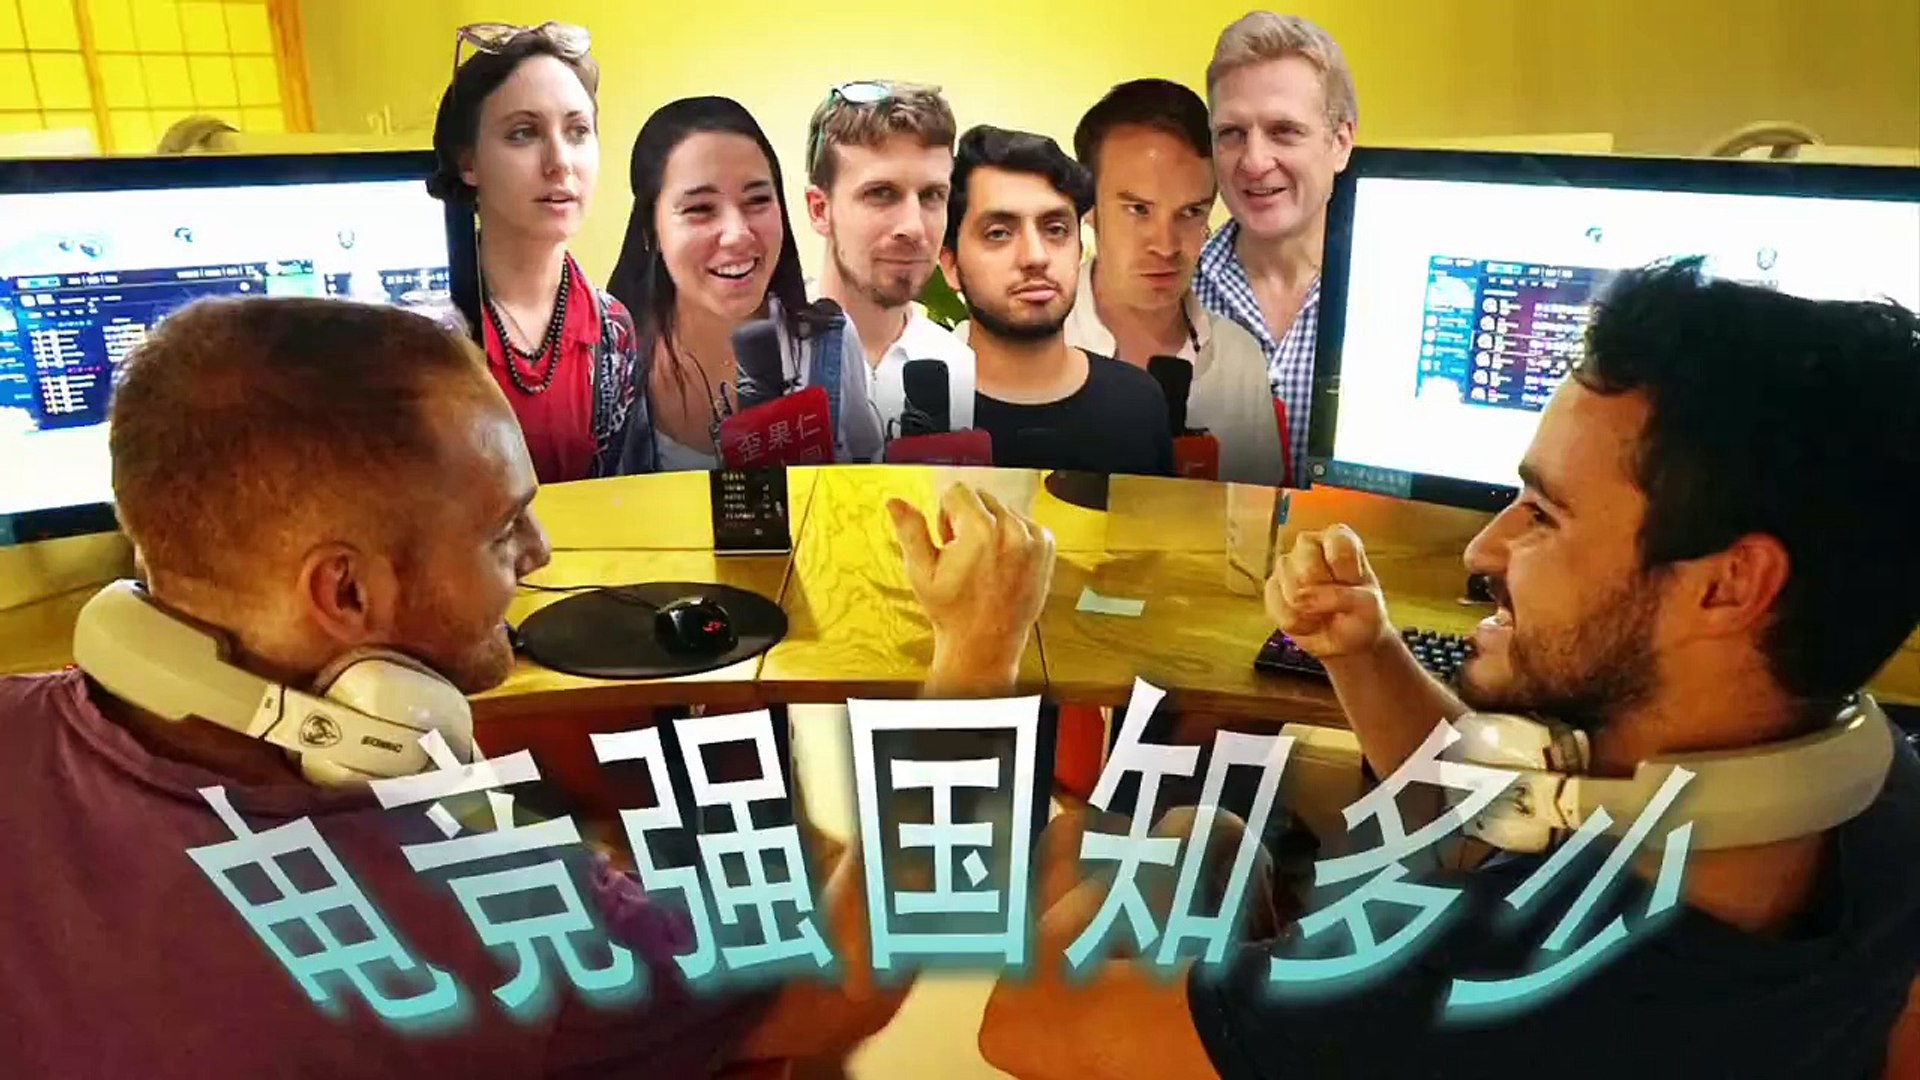 ⁣【Video】Playing electronic games could win honor for your country, How do you like the idea?